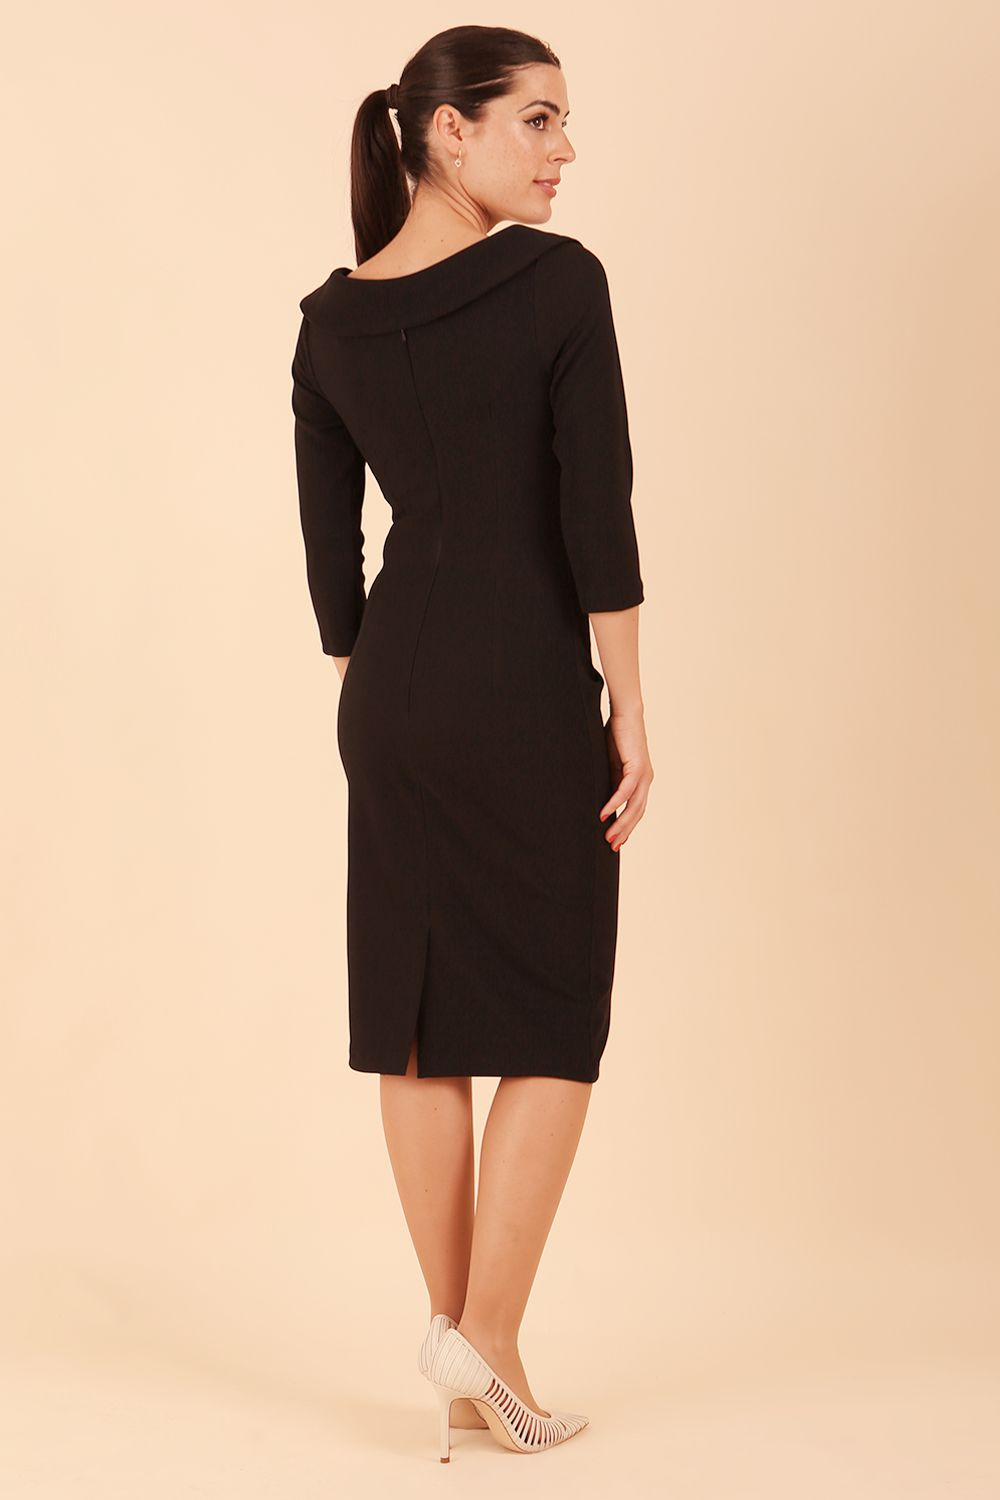 Model wearing diva catwalk Monique 3/4 Sleeve Pencil Dress with Overlapping Folded Round Neckline and 3/4 sleeves and knee length in Black back